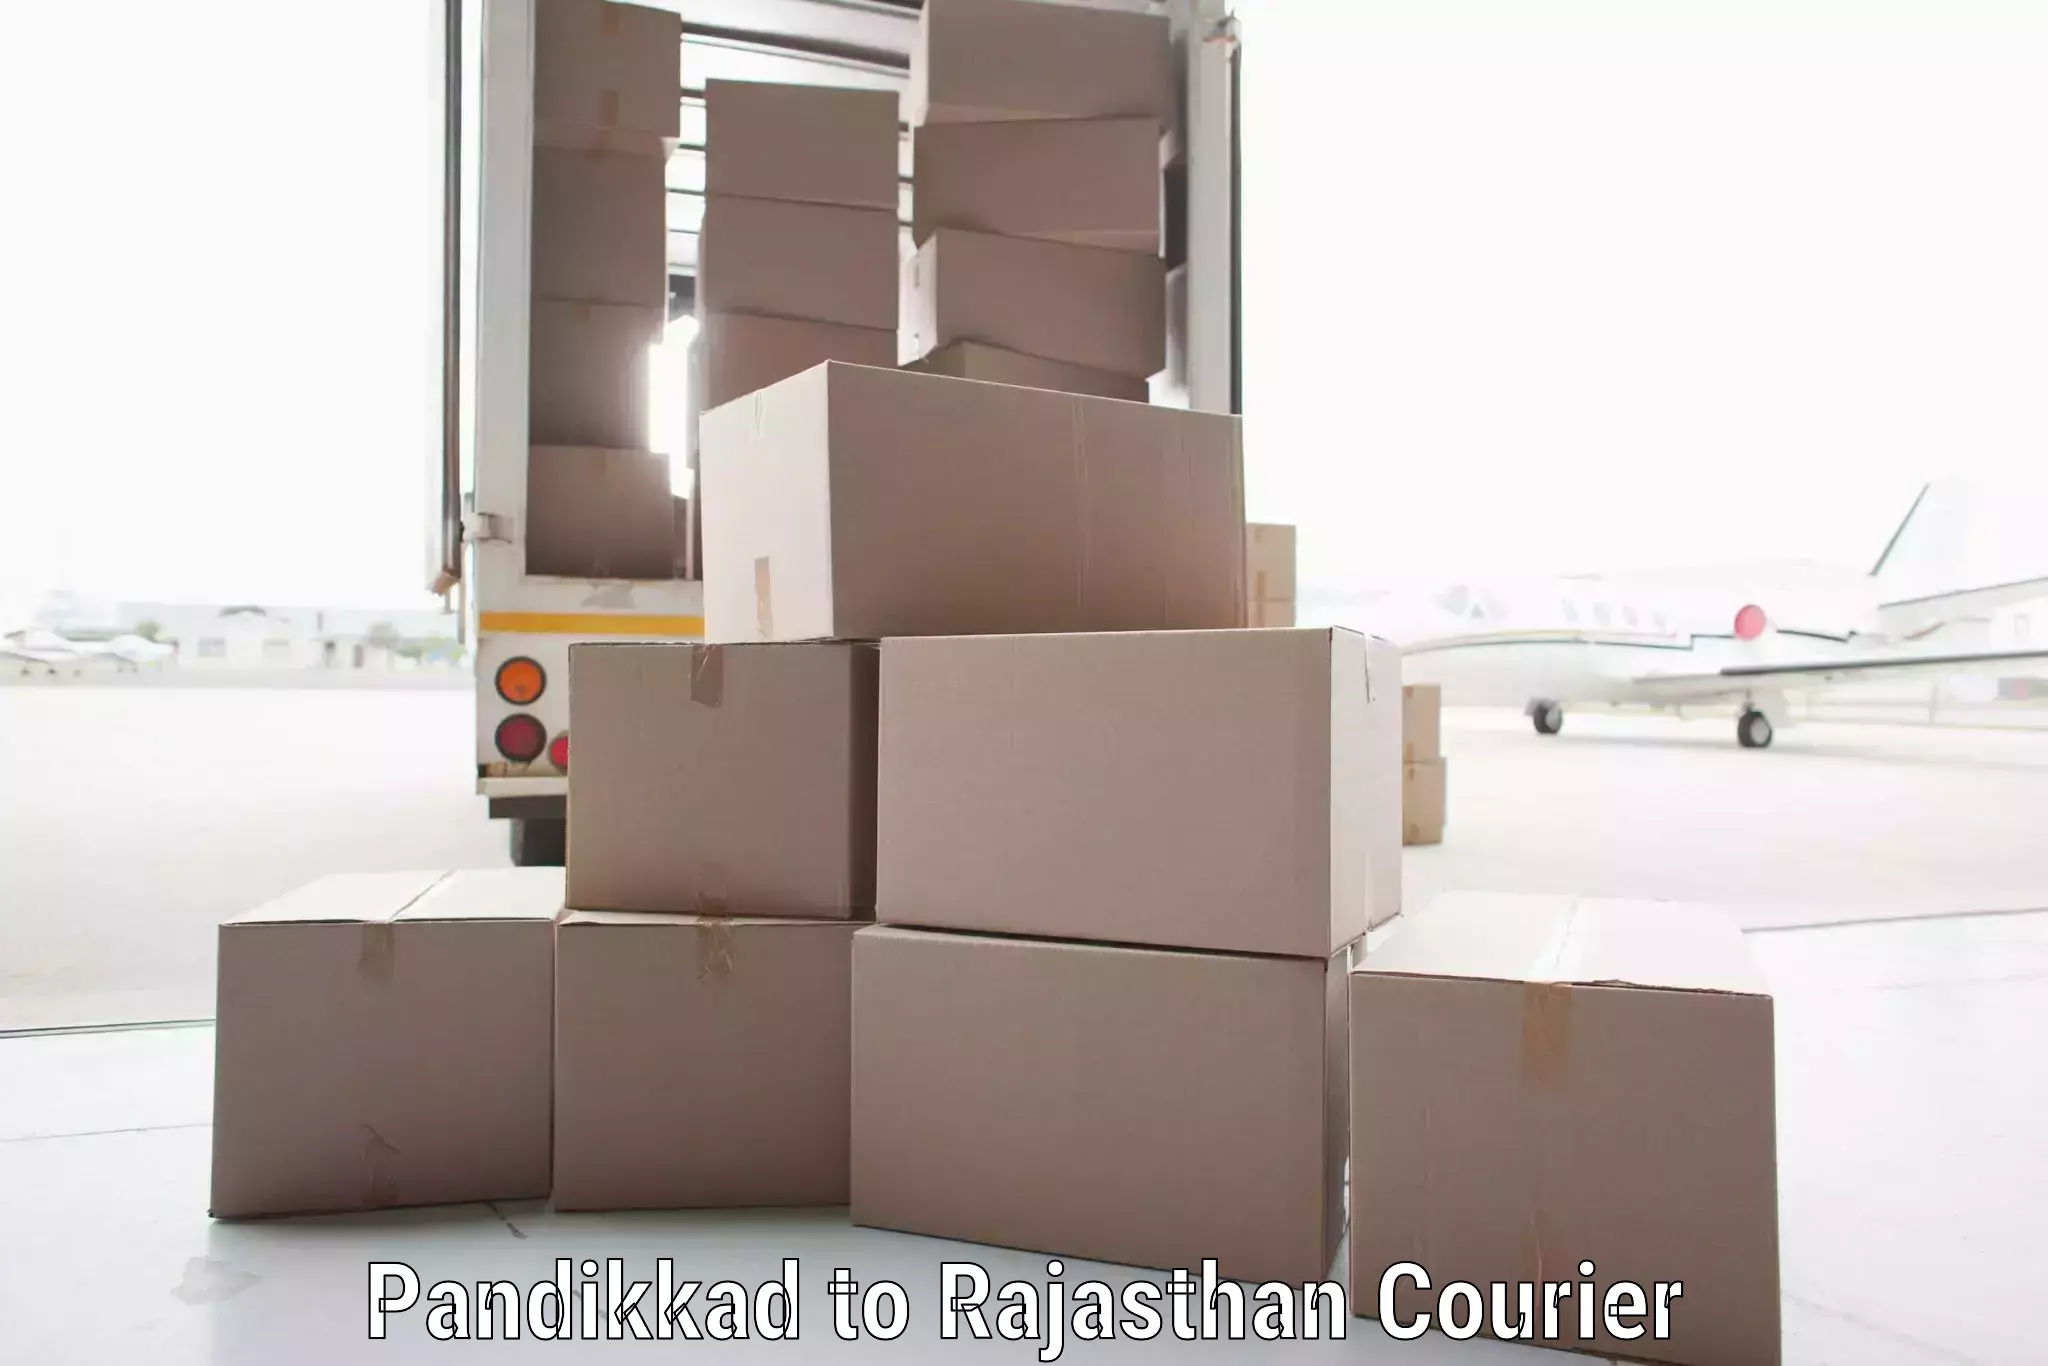 Global courier networks Pandikkad to Shrimadhopur